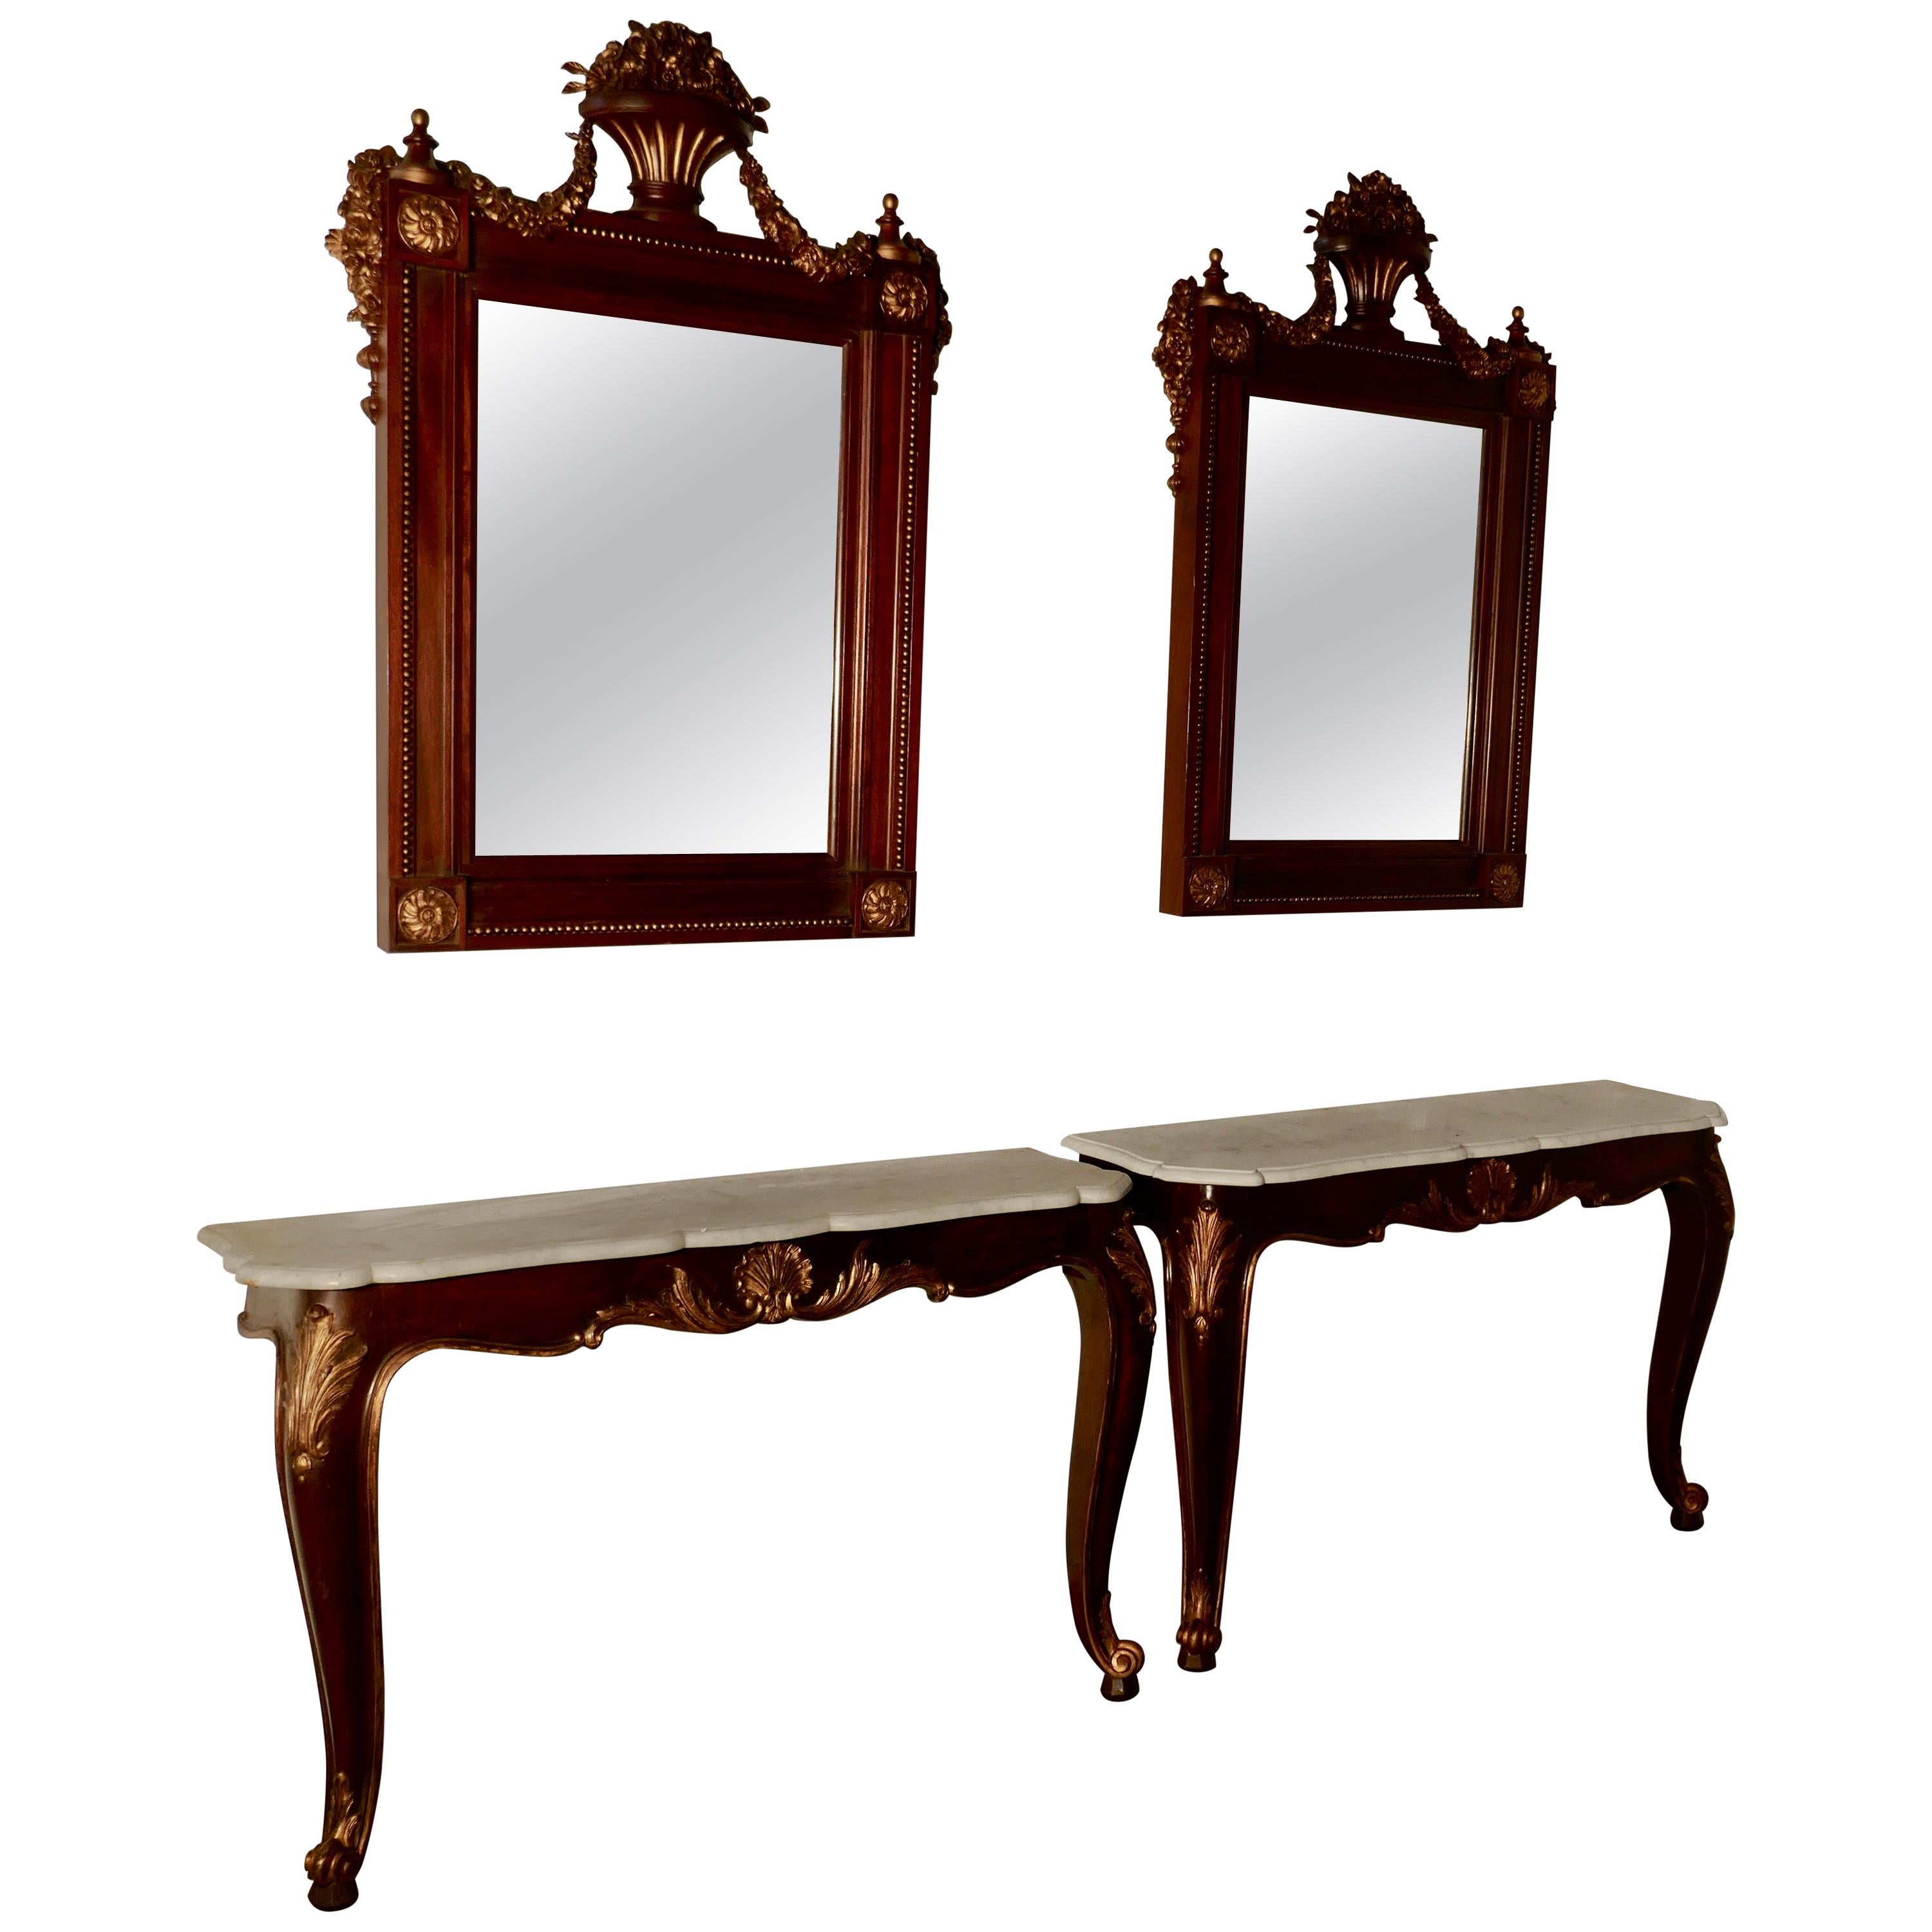 Pair of French Marble-Top Console Tables with Mirrors